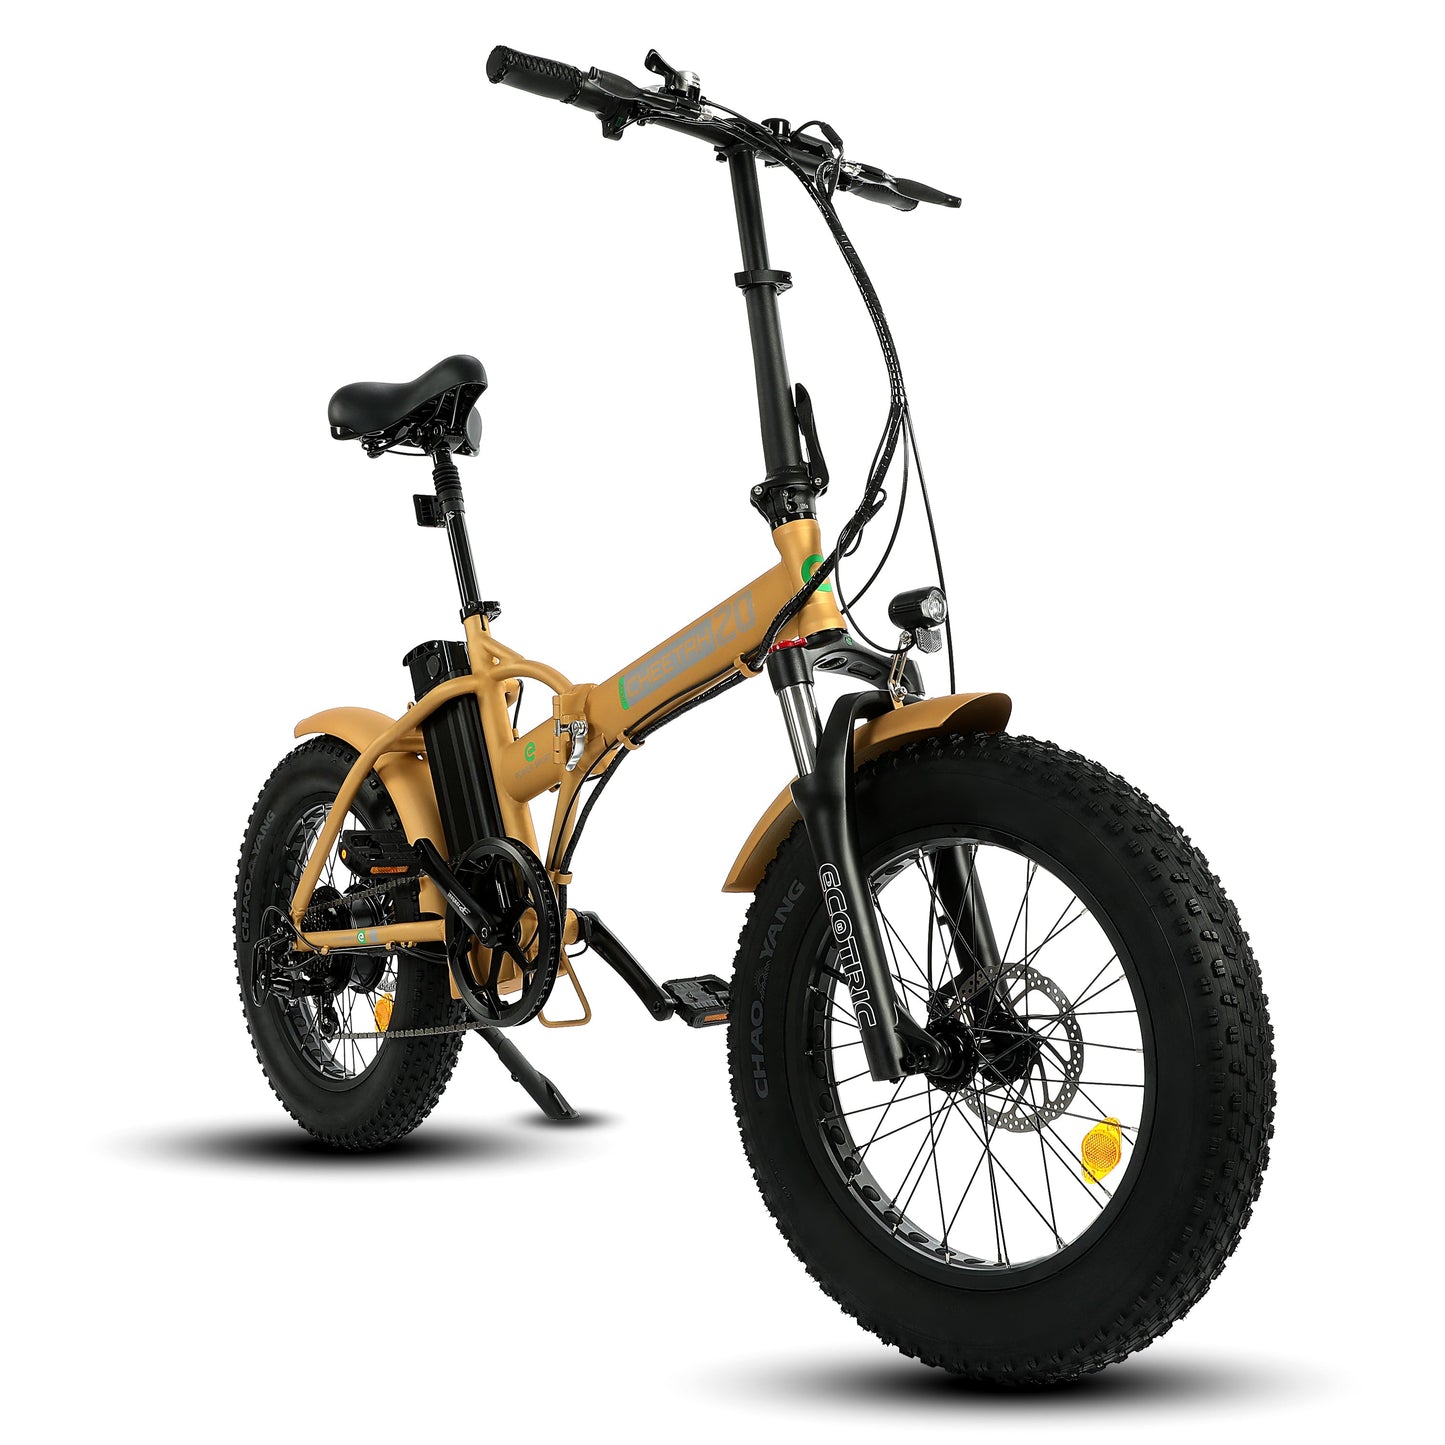 Ecotric 48V Portable Folding Fat Tire Long Distance eBike 500W w/ LCD Display For Leisure